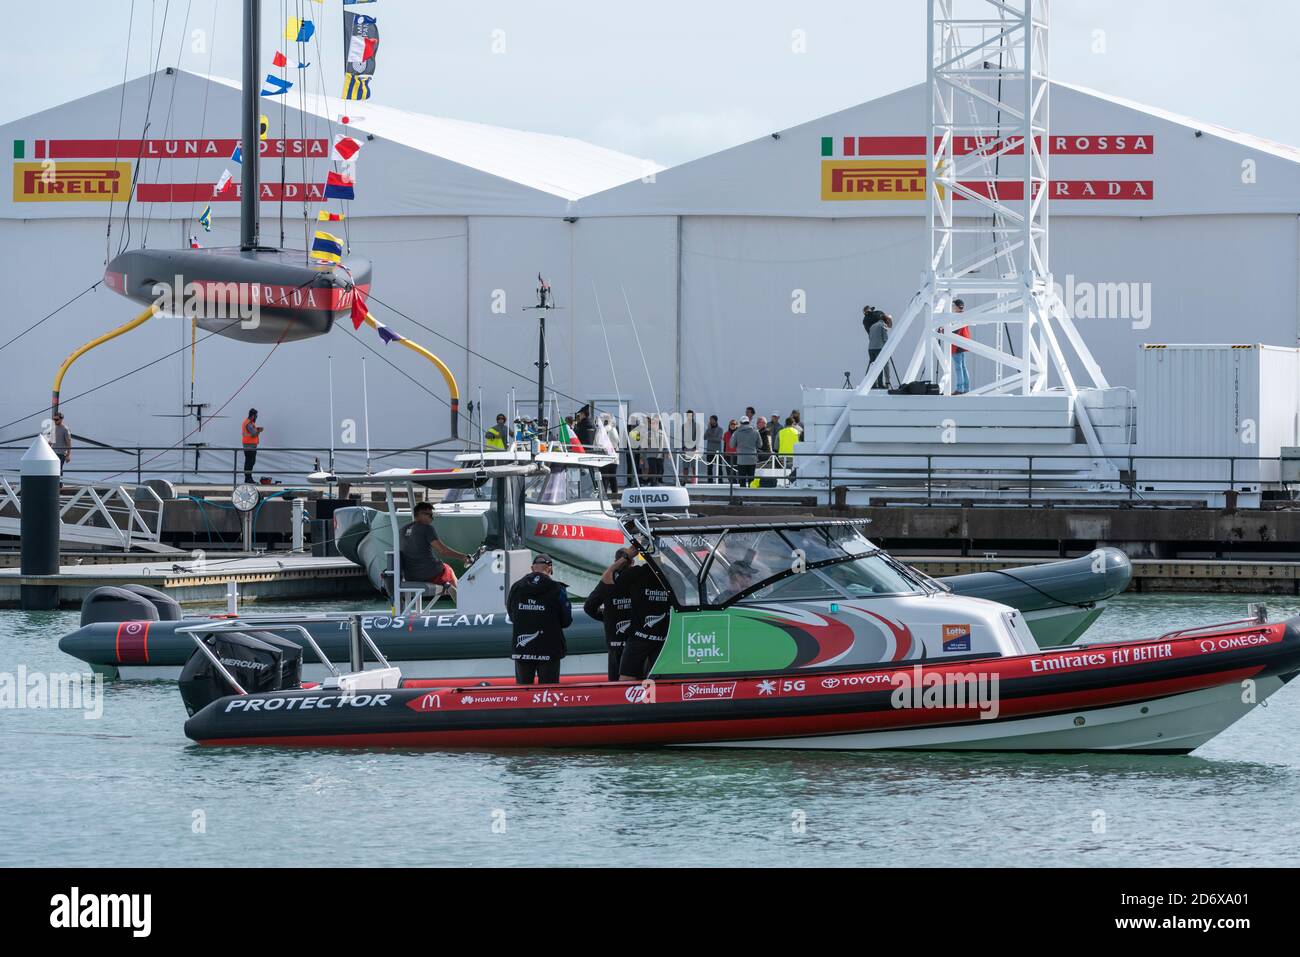 America's Cup team Luna Rossa Prada Pirelli Team christen and launch their second AC75 at their Base in Aucklands Viaduct Harbour.20/10/2020 Stock Photo